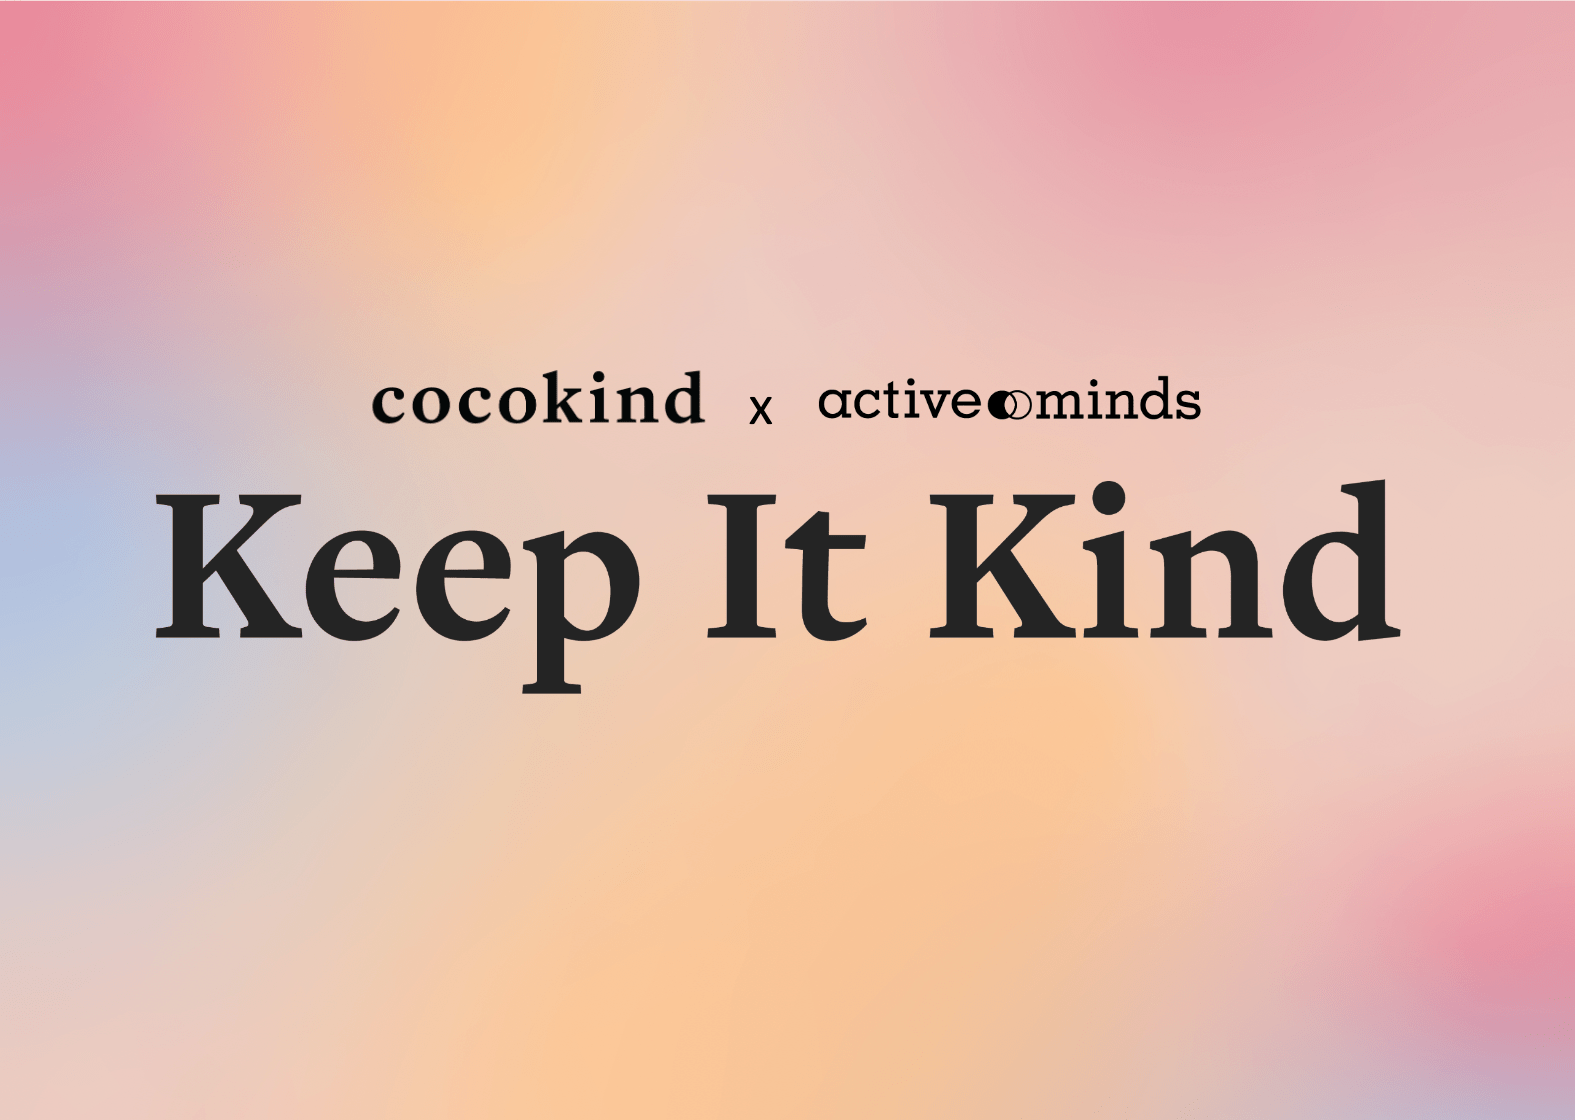 May is Mental Health Awareness Month - cocokind